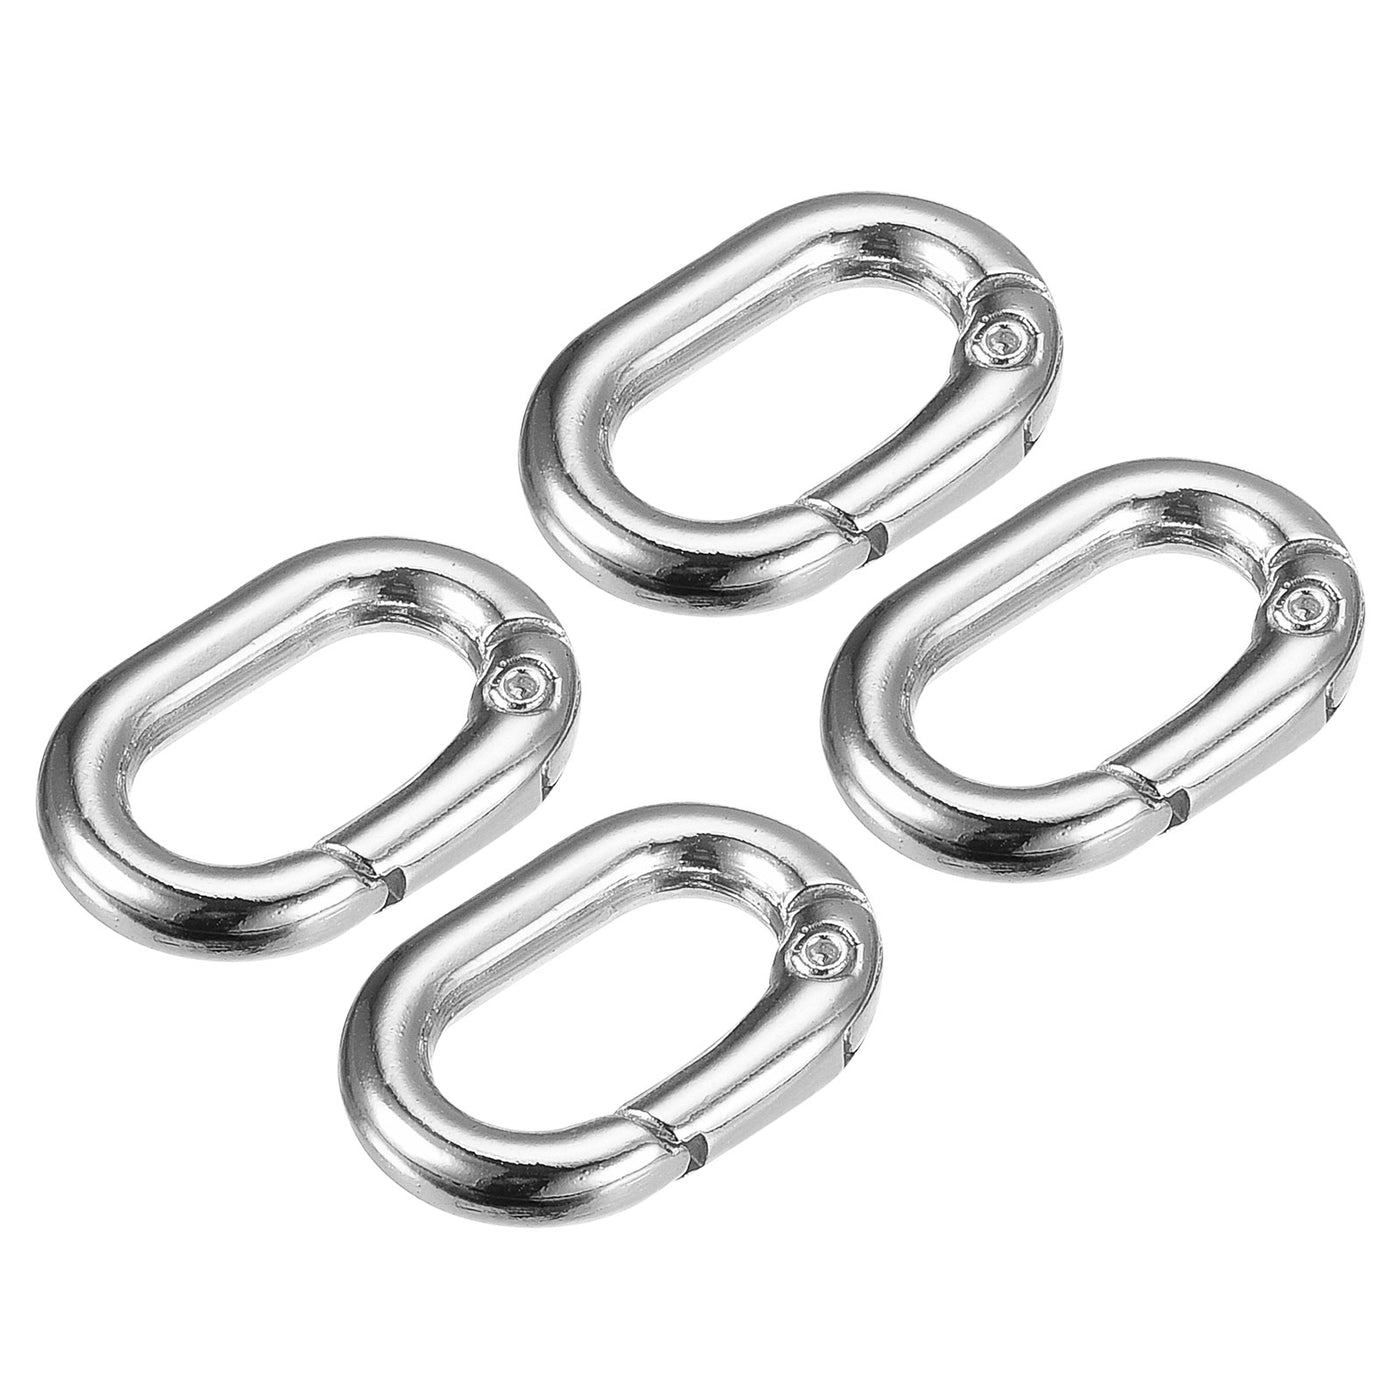 uxcell Uxcell 0.83" Spring Oval Ring Snap Clip Trigger for Bag Purse Keychain, 4Pcs Silver